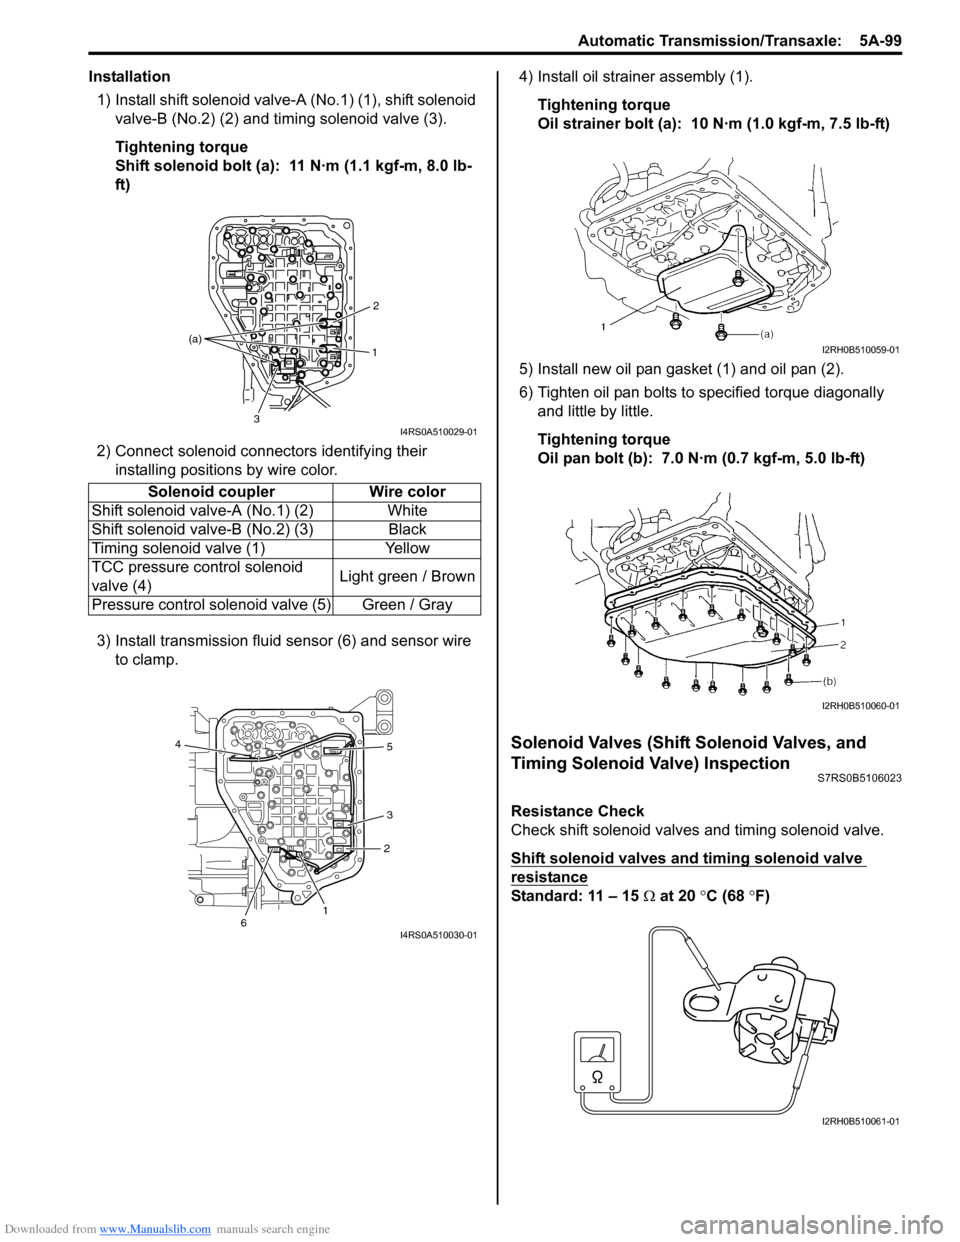 SUZUKI SWIFT 2007 2.G Service Repair Manual Downloaded from www.Manualslib.com manuals search engine Automatic Transmission/Transaxle:  5A-99
Installation1) Install shift solenoid valve- A (No.1) (1), shift solenoid 
valve-B (No.2) (2) and timi